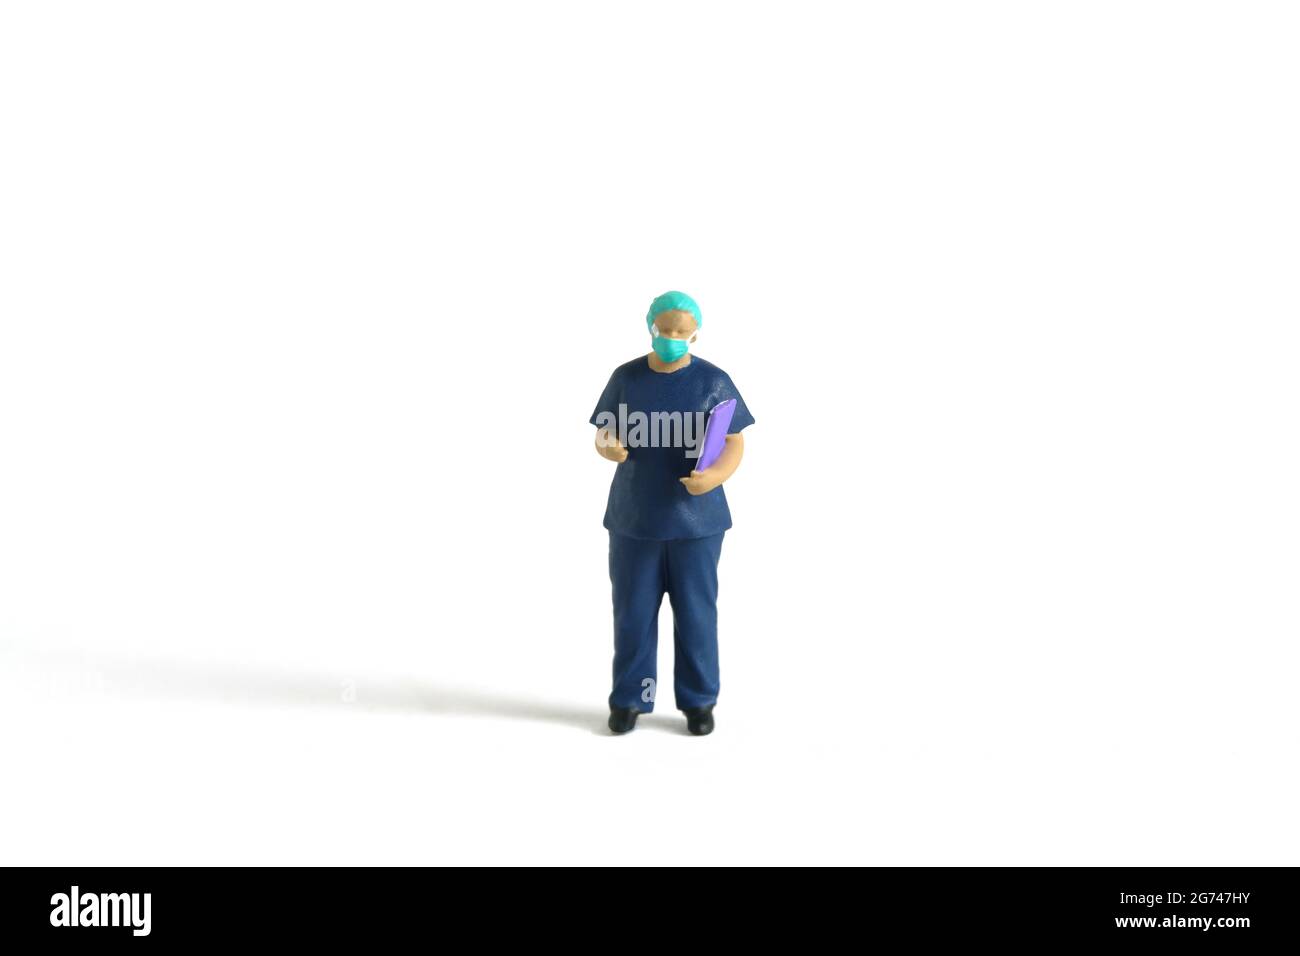 Miniature people toy figure photography. A women doctor wearing surgical gown with handing medical checkup document, isolated on white background. Ima Stock Photo